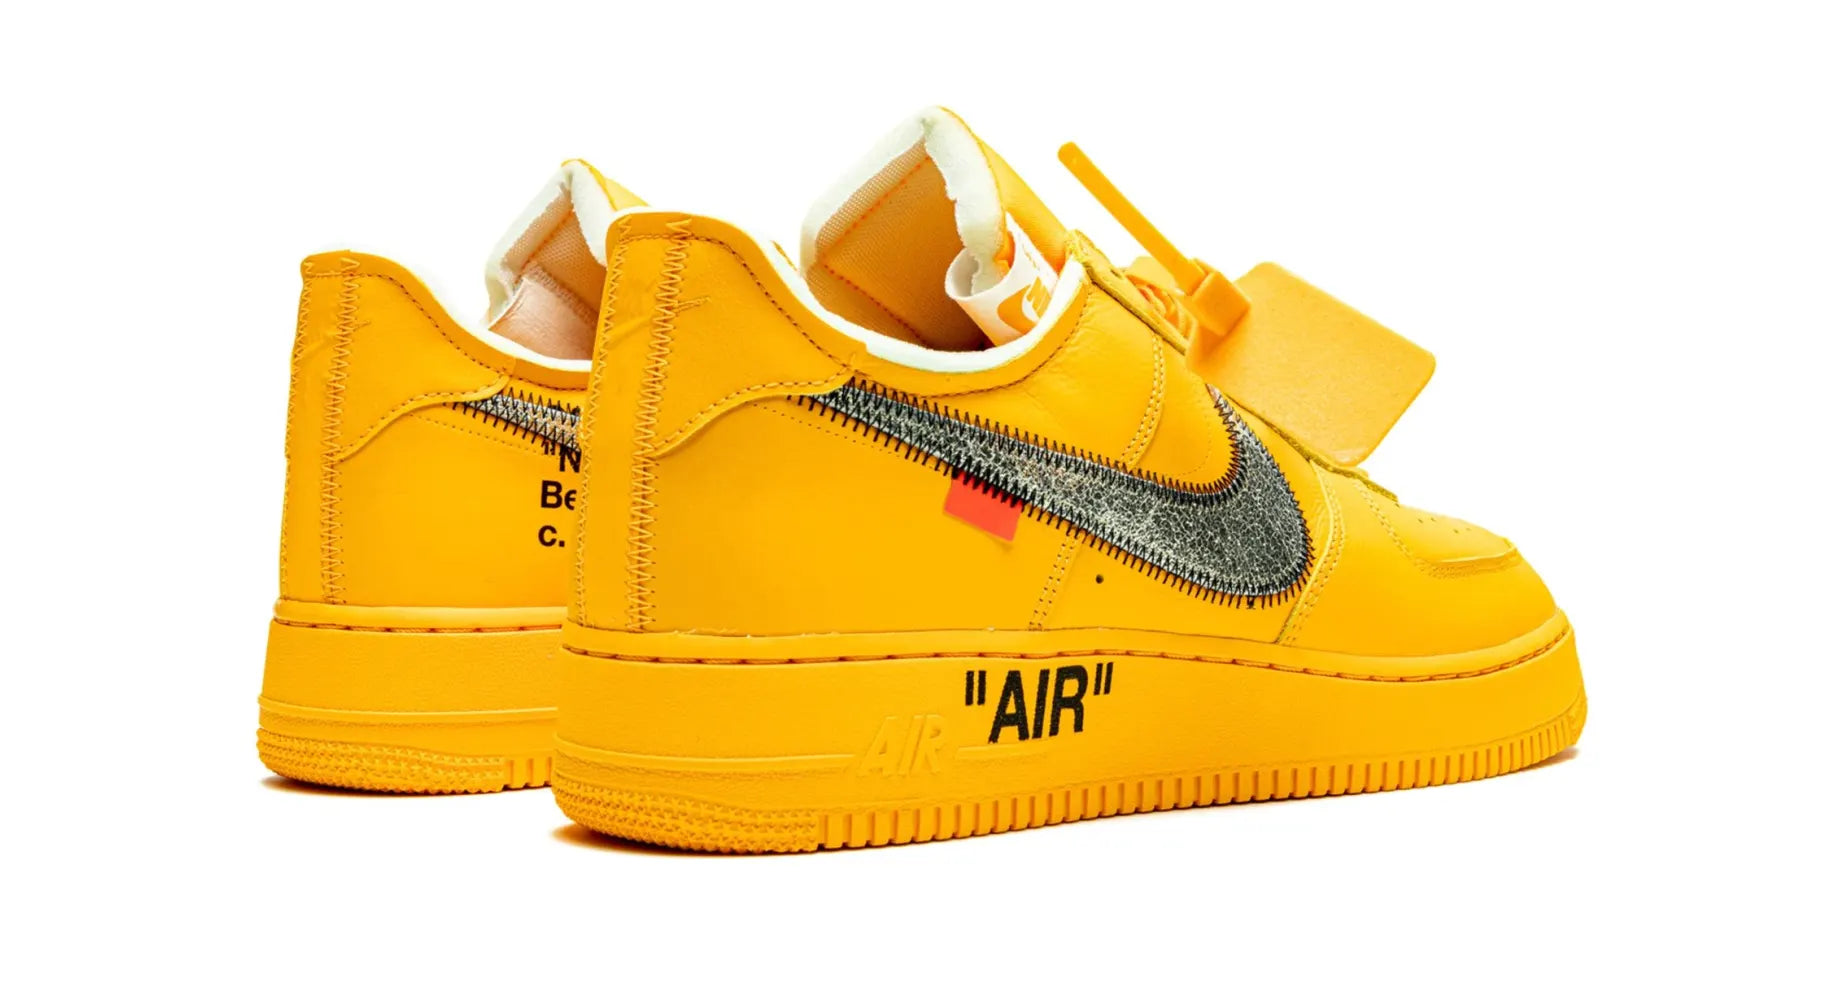 Nike Air Force 1 Low Off-White ICA University Gold 9.5M/11W (Pre-Owned)